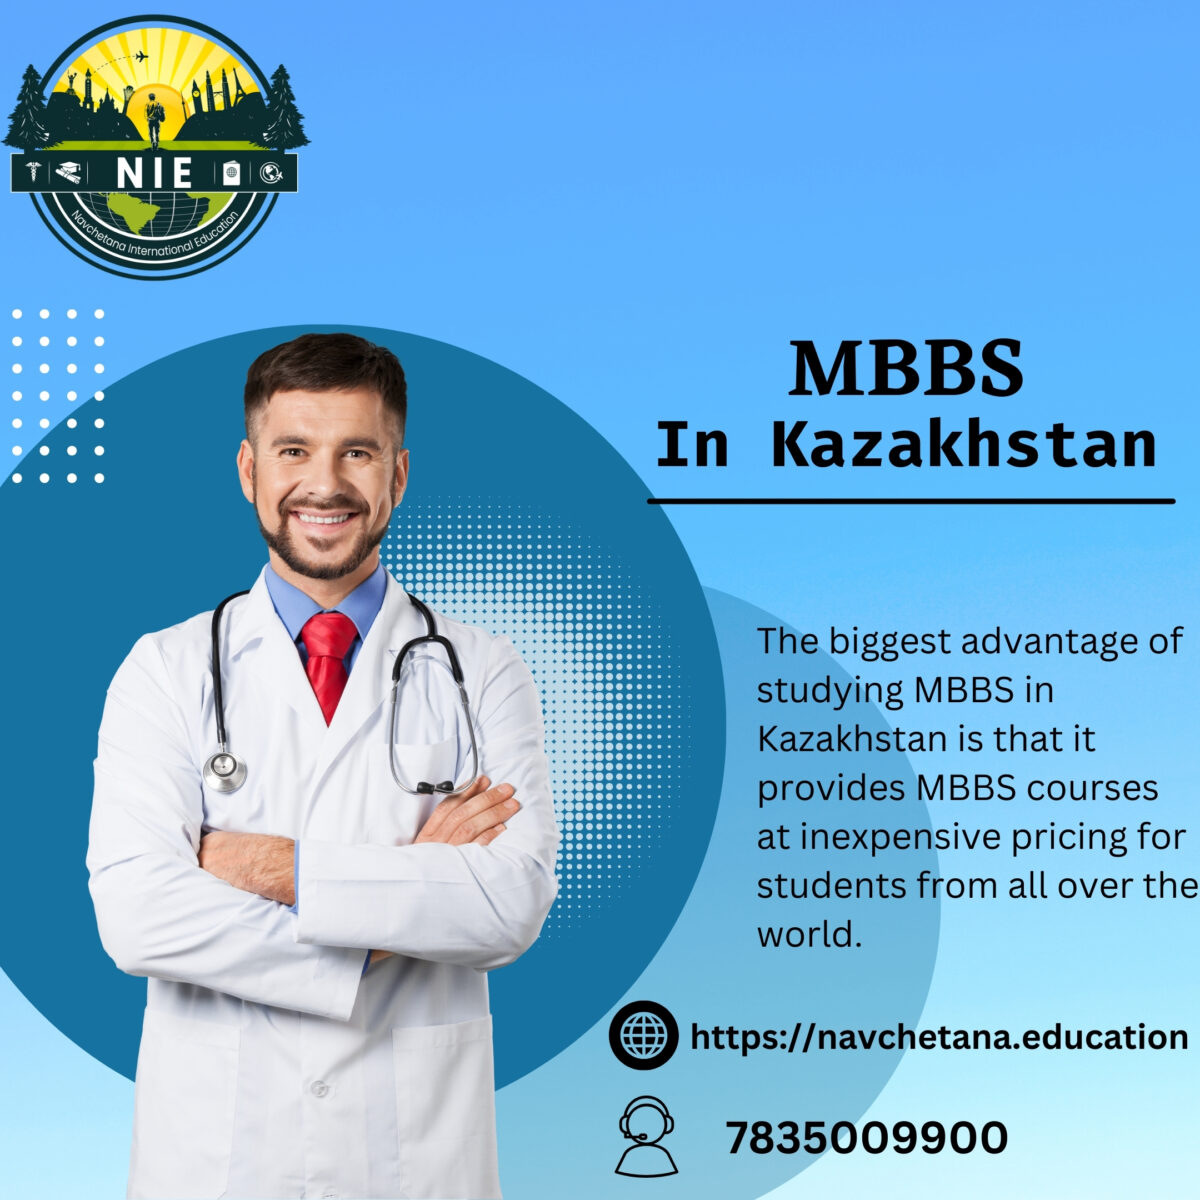 A Complete Guide to Studying MBBS in Kazakhstan